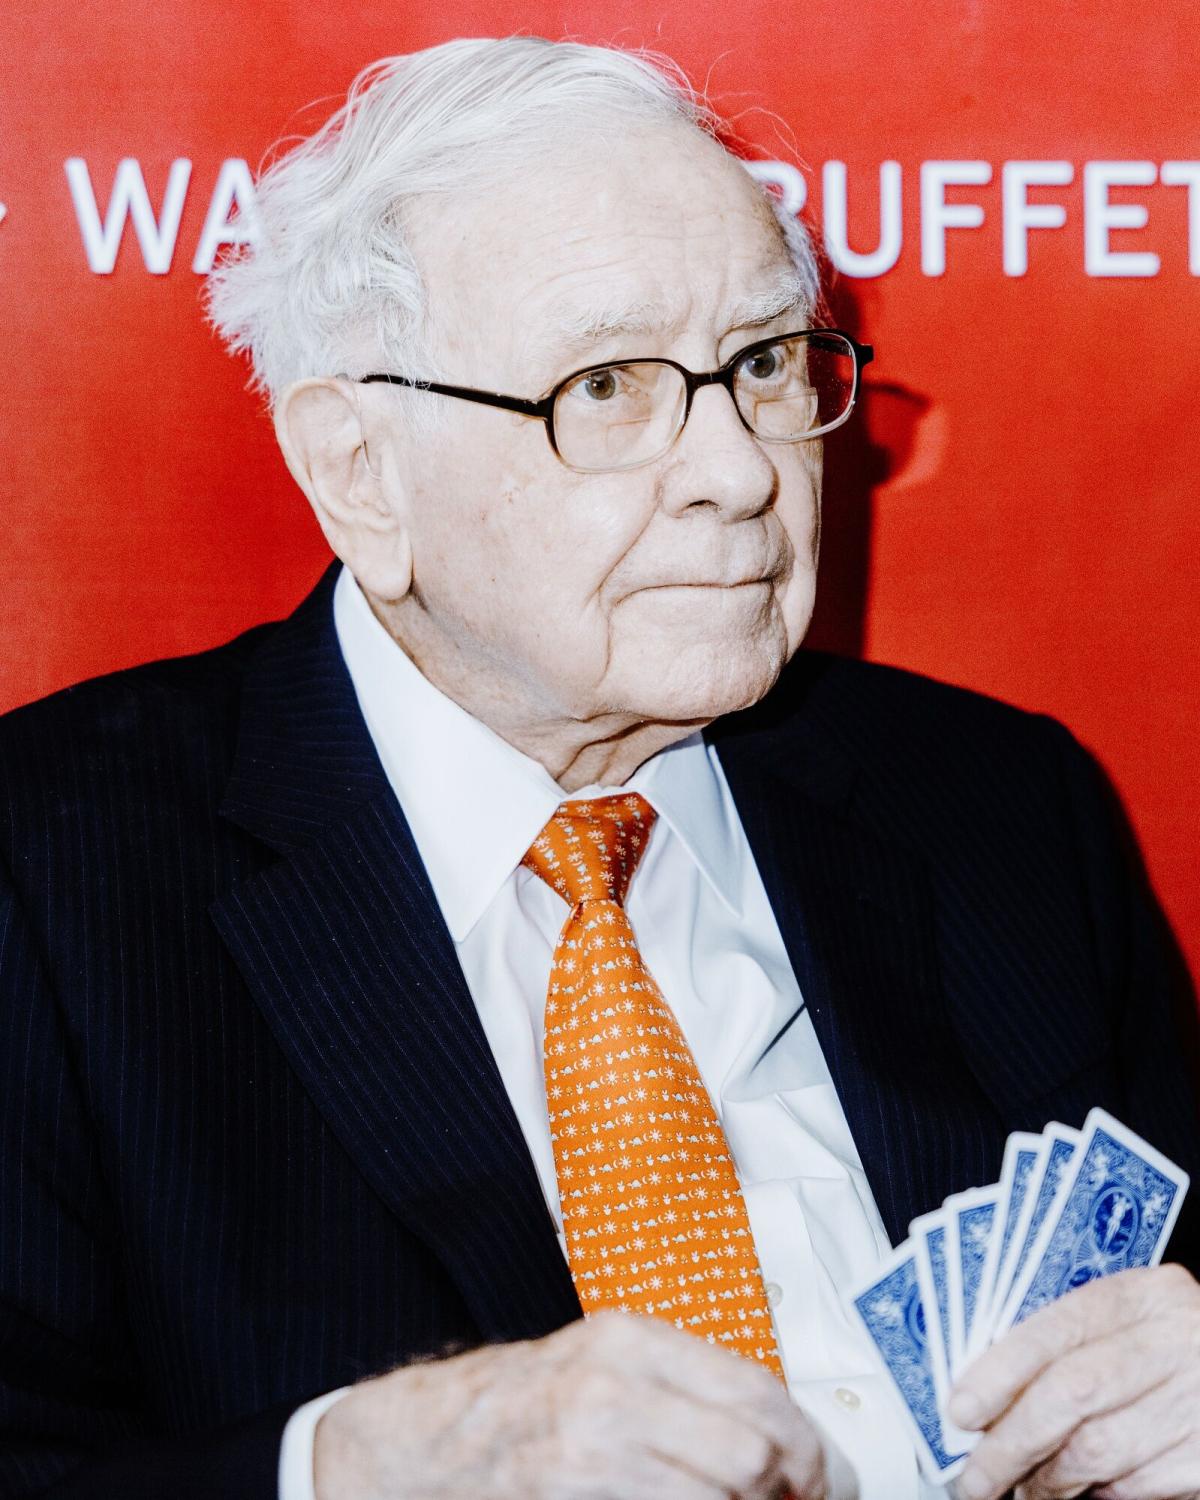 Buffett praises Apple after pruning it and drops the biggest bet